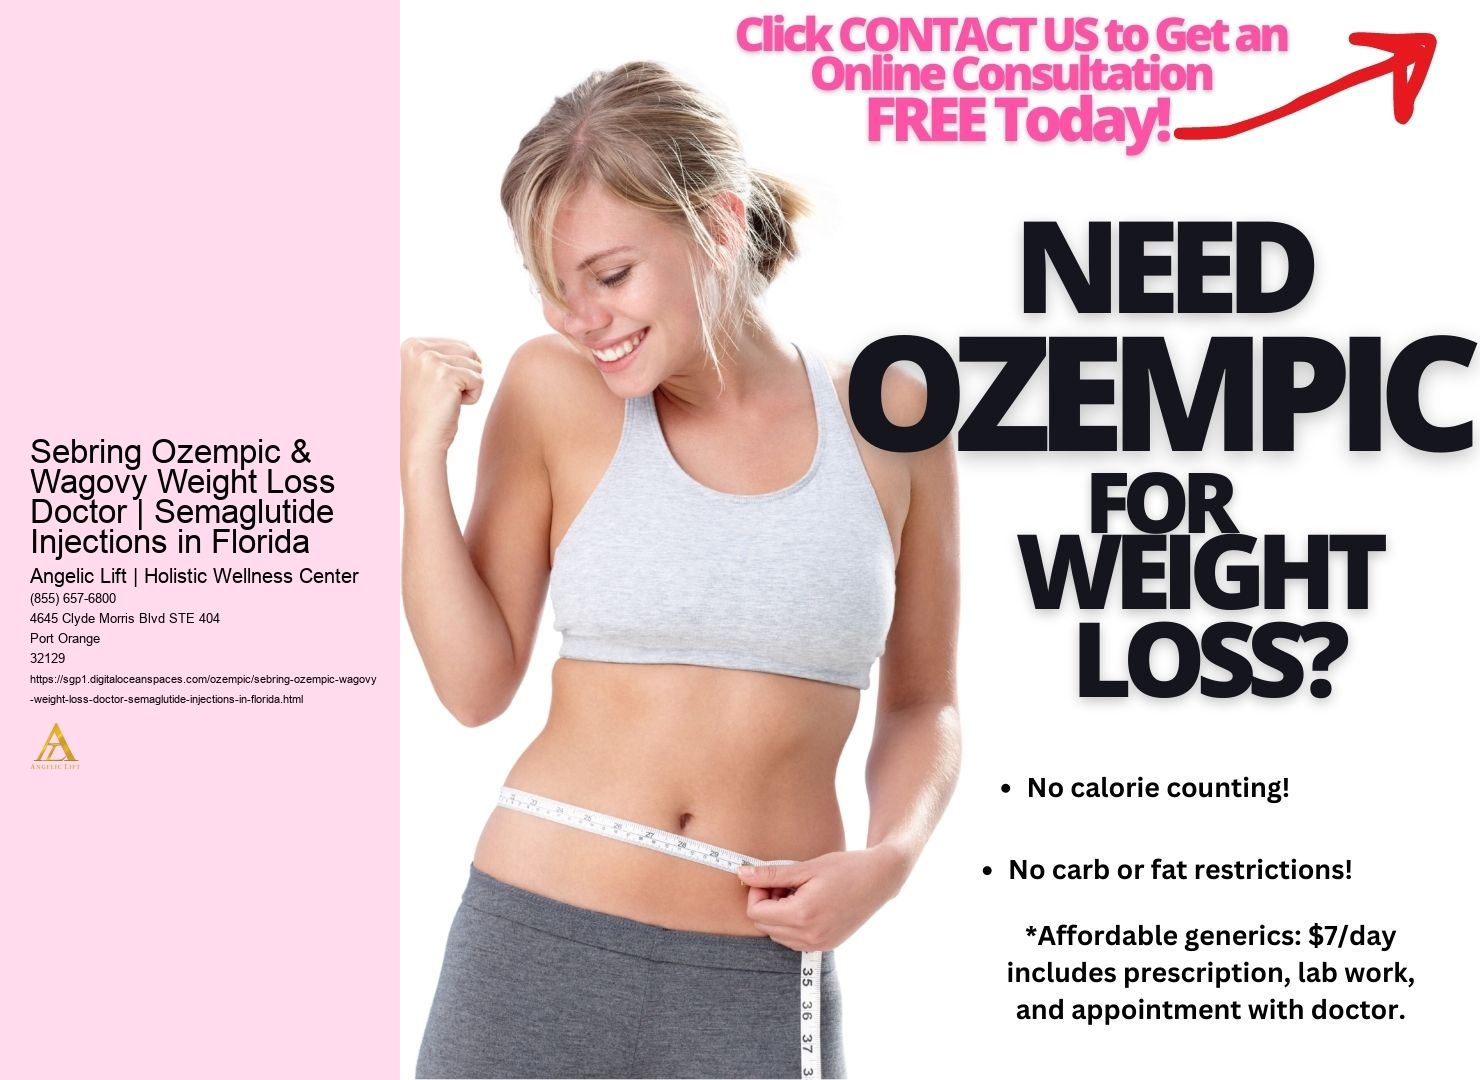 Sebring Ozempic & Wagovy Weight Loss Doctor | Semaglutide Injections in Florida